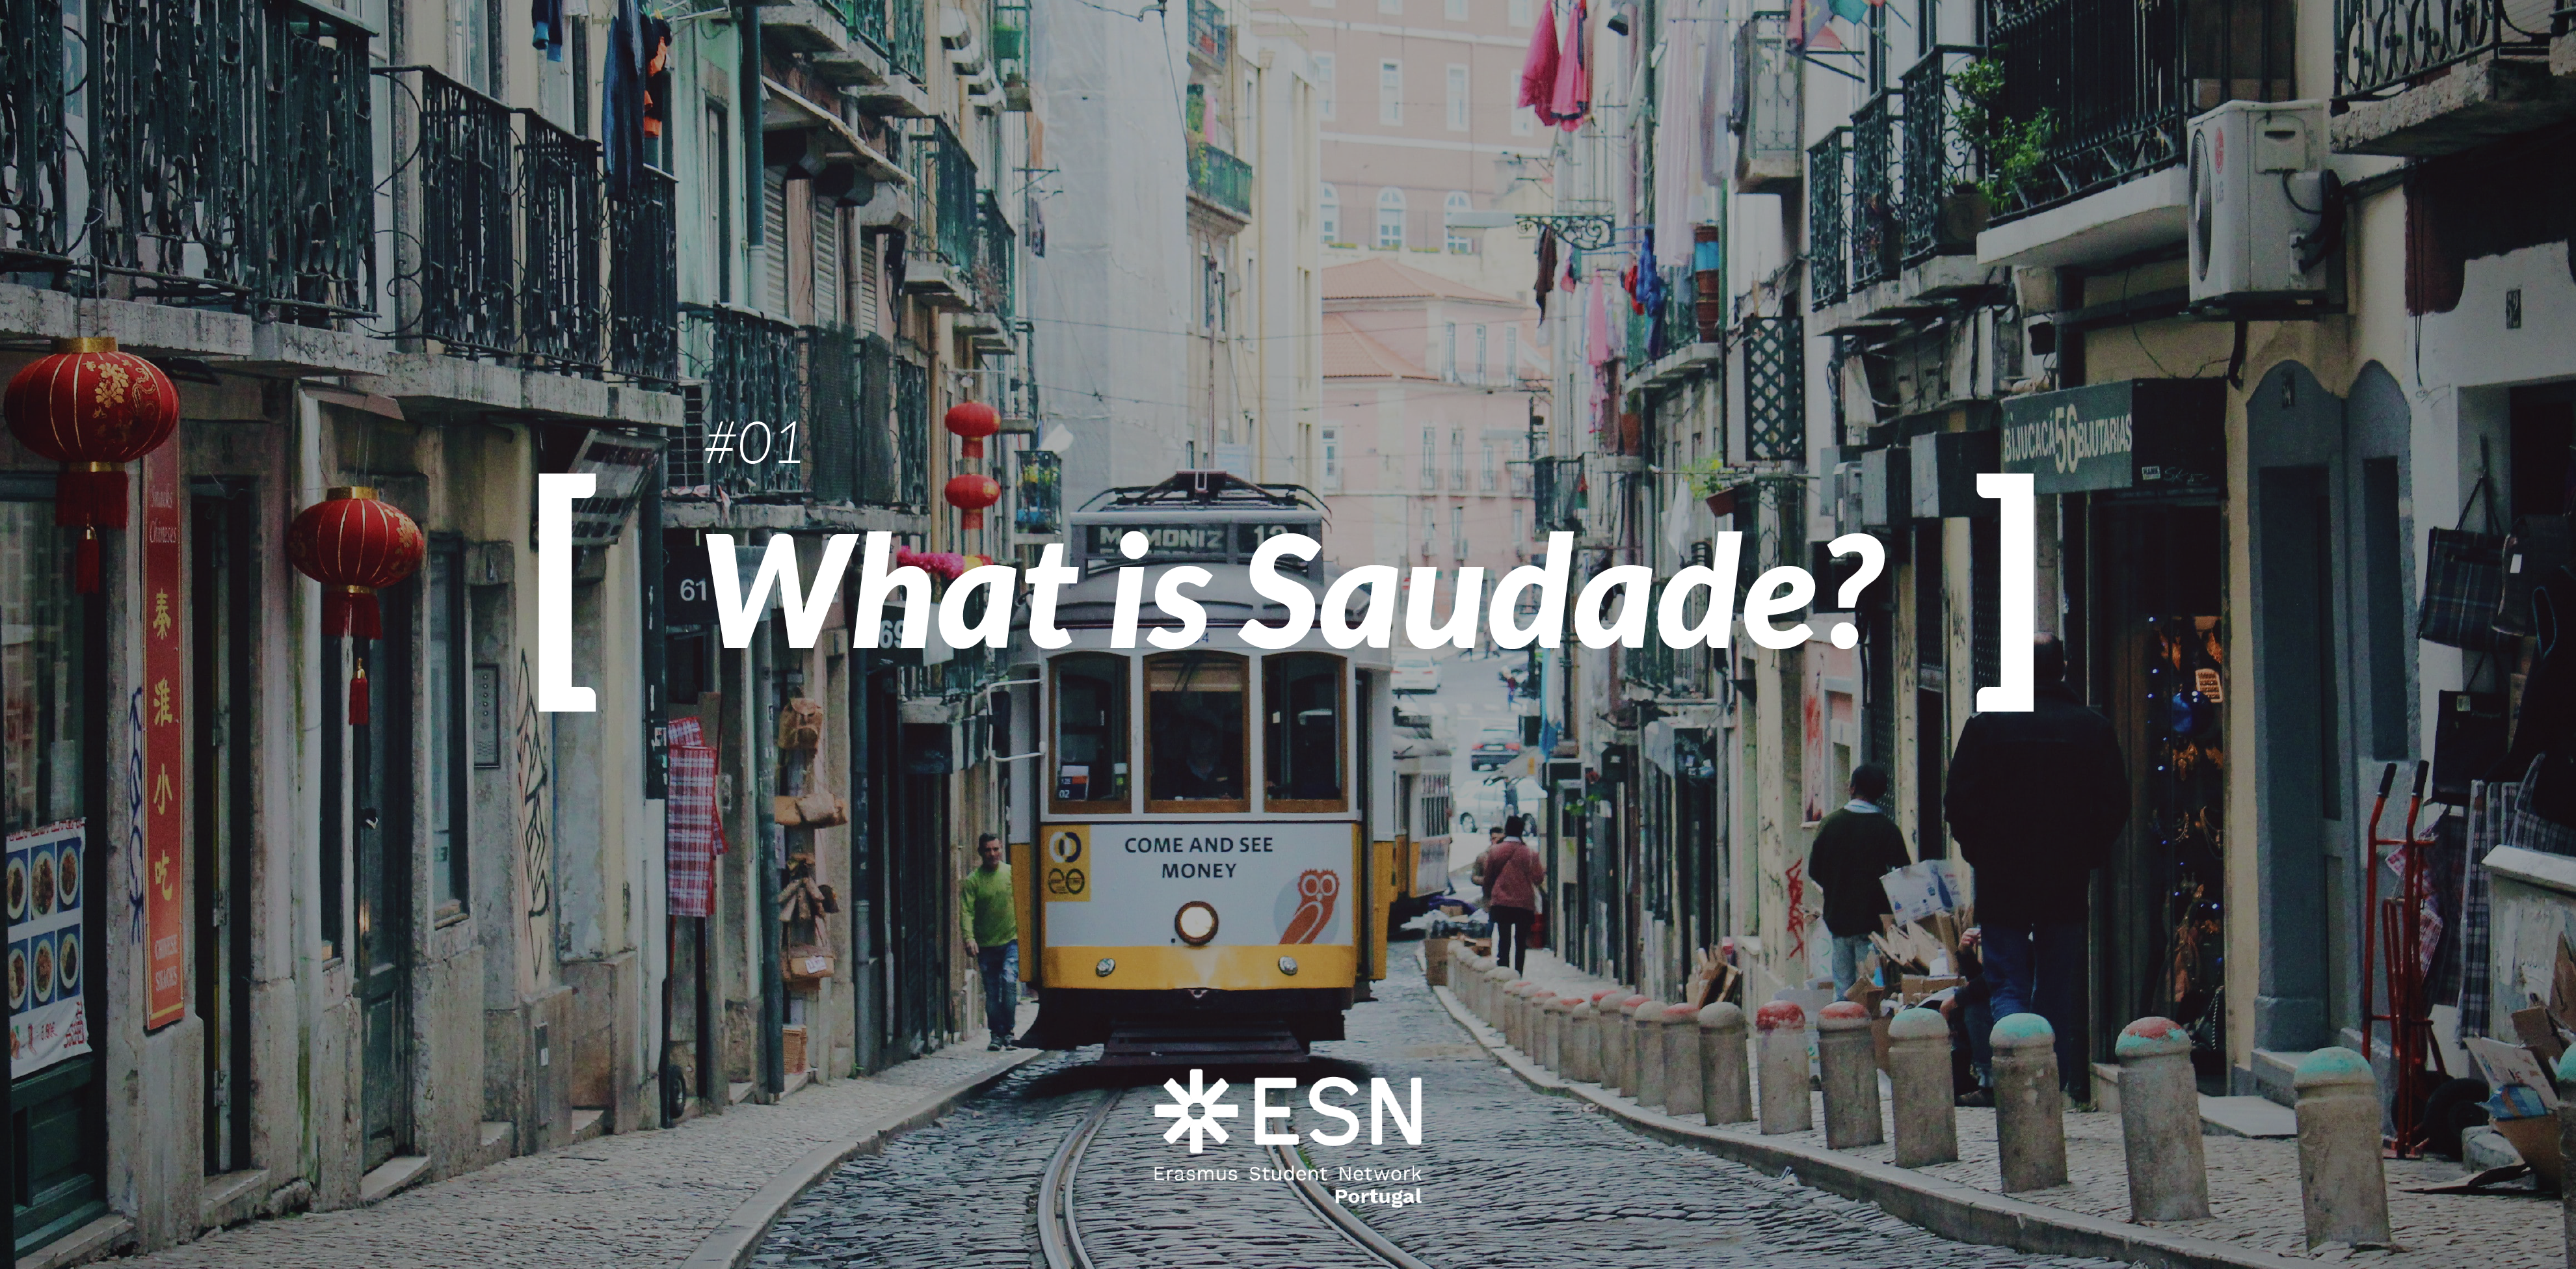 What is Saudade? - Portugalist